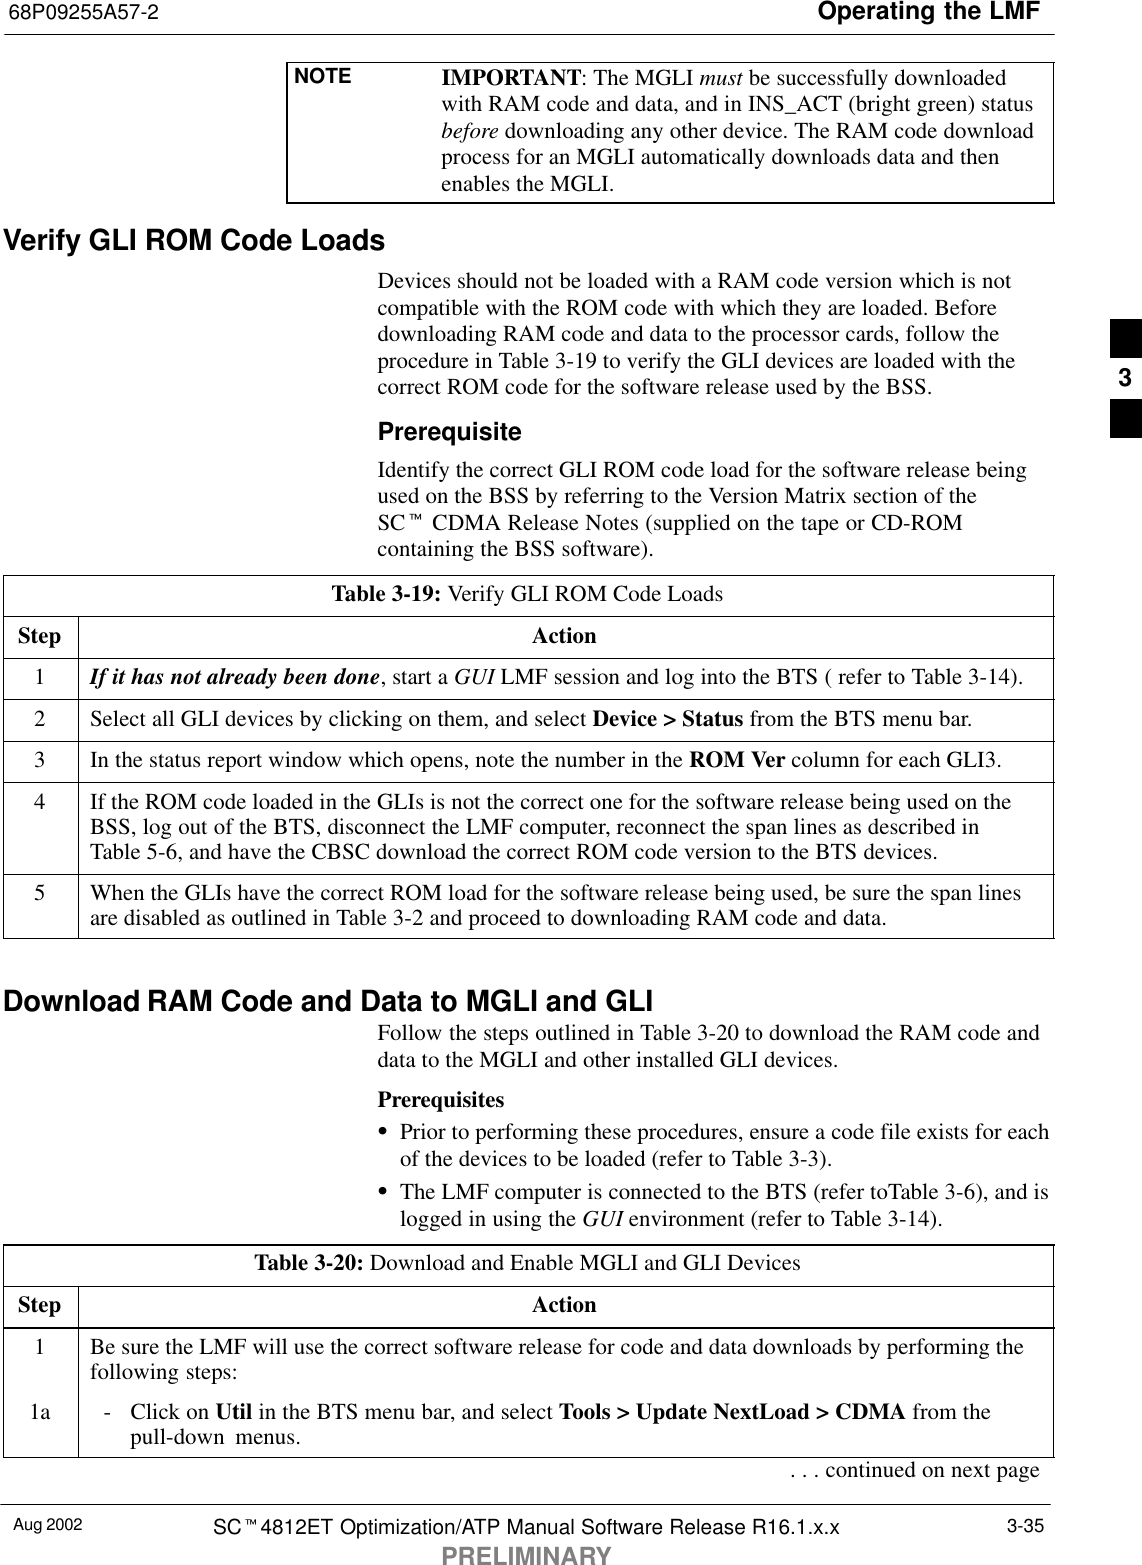 Operating the LMF68P09255A57-2Aug 2002 SCt4812ET Optimization/ATP Manual Software Release R16.1.x.xPRELIMINARY3-35NOTE IMPORTANT: The MGLI must be successfully downloadedwith RAM code and data, and in INS_ACT (bright green) statusbefore downloading any other device. The RAM code downloadprocess for an MGLI automatically downloads data and thenenables the MGLI.Verify GLI ROM Code LoadsDevices should not be loaded with a RAM code version which is notcompatible with the ROM code with which they are loaded. Beforedownloading RAM code and data to the processor cards, follow theprocedure in Table 3-19 to verify the GLI devices are loaded with thecorrect ROM code for the software release used by the BSS.PrerequisiteIdentify the correct GLI ROM code load for the software release beingused on the BSS by referring to the Version Matrix section of theSCt CDMA Release Notes (supplied on the tape or CD-ROMcontaining the BSS software).Table 3-19: Verify GLI ROM Code LoadsStep Action1If it has not already been done, start a GUI LMF session and log into the BTS ( refer to Table 3-14).2Select all GLI devices by clicking on them, and select Device &gt; Status from the BTS menu bar.3In the status report window which opens, note the number in the ROM Ver column for each GLI3.4If the ROM code loaded in the GLIs is not the correct one for the software release being used on theBSS, log out of the BTS, disconnect the LMF computer, reconnect the span lines as described inTable 5-6, and have the CBSC download the correct ROM code version to the BTS devices.5When the GLIs have the correct ROM load for the software release being used, be sure the span linesare disabled as outlined in Table 3-2 and proceed to downloading RAM code and data. Download RAM Code and Data to MGLI and GLIFollow the steps outlined in Table 3-20 to download the RAM code anddata to the MGLI and other installed GLI devices.PrerequisitesSPrior to performing these procedures, ensure a code file exists for eachof the devices to be loaded (refer to Table 3-3).SThe LMF computer is connected to the BTS (refer toTable 3-6), and islogged in using the GUI environment (refer to Table 3-14).Table 3-20: Download and Enable MGLI and GLI DevicesStep Action1Be sure the LMF will use the correct software release for code and data downloads by performing thefollowing steps:1a - Click on Util in the BTS menu bar, and select Tools &gt; Update NextLoad &gt; CDMA from thepull-down menus.. . . continued on next page3